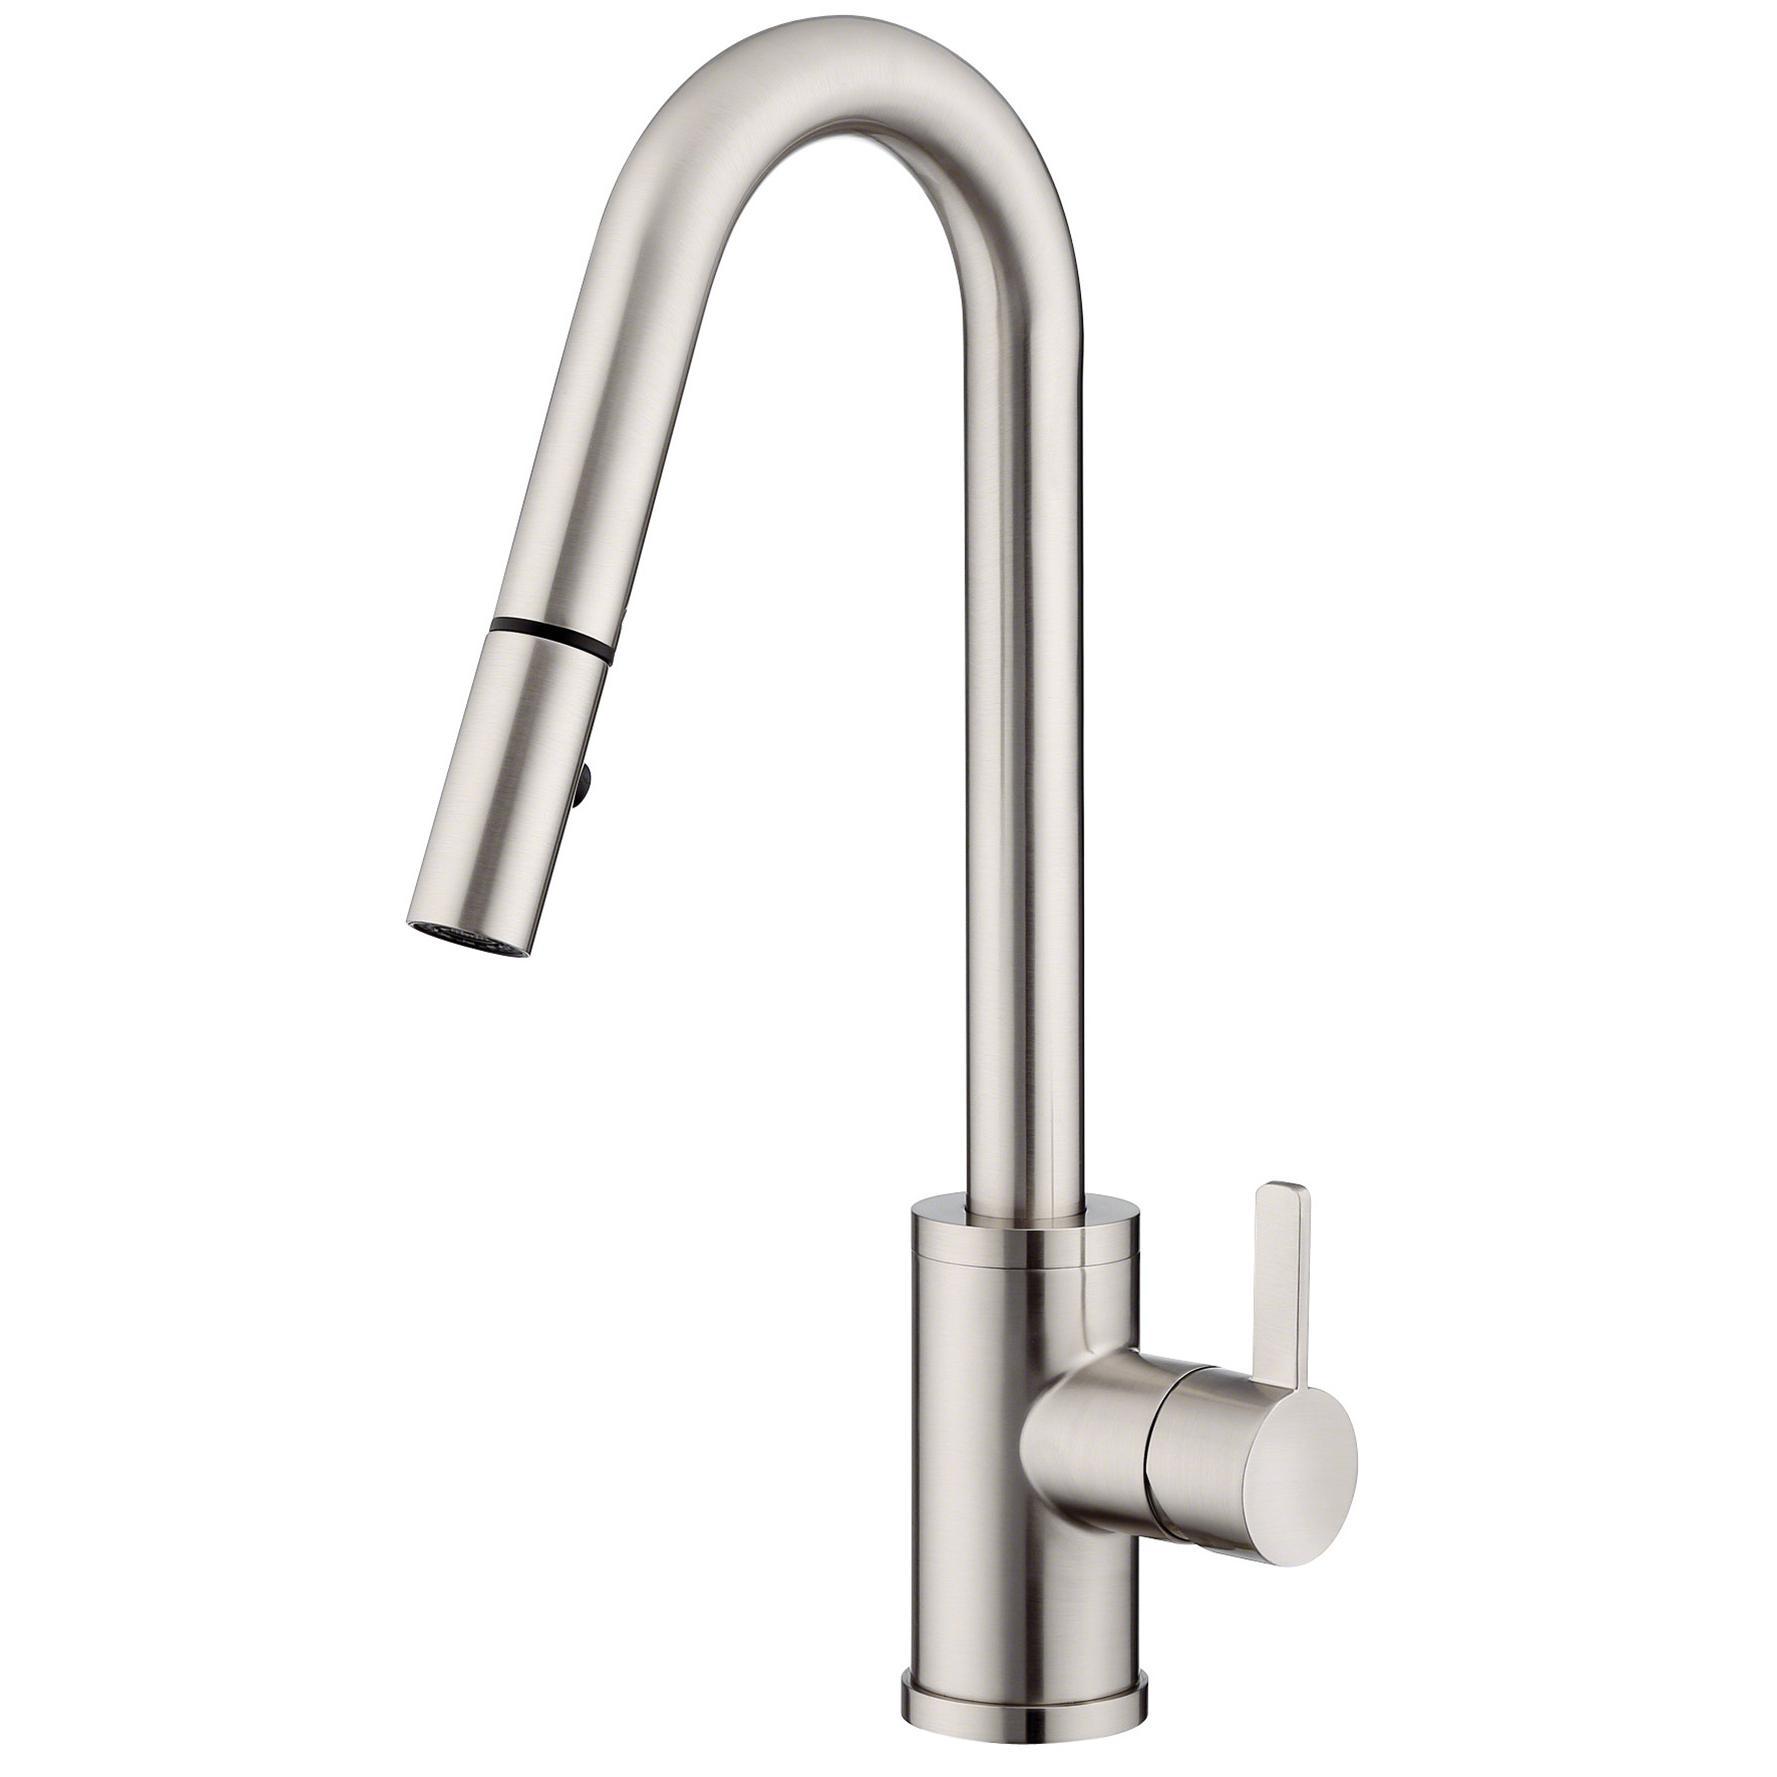 Danze D457230SS Amalfi 1H Pull-Down Kitchen Faucet w/SnapBack Retraction - Stainless Steel